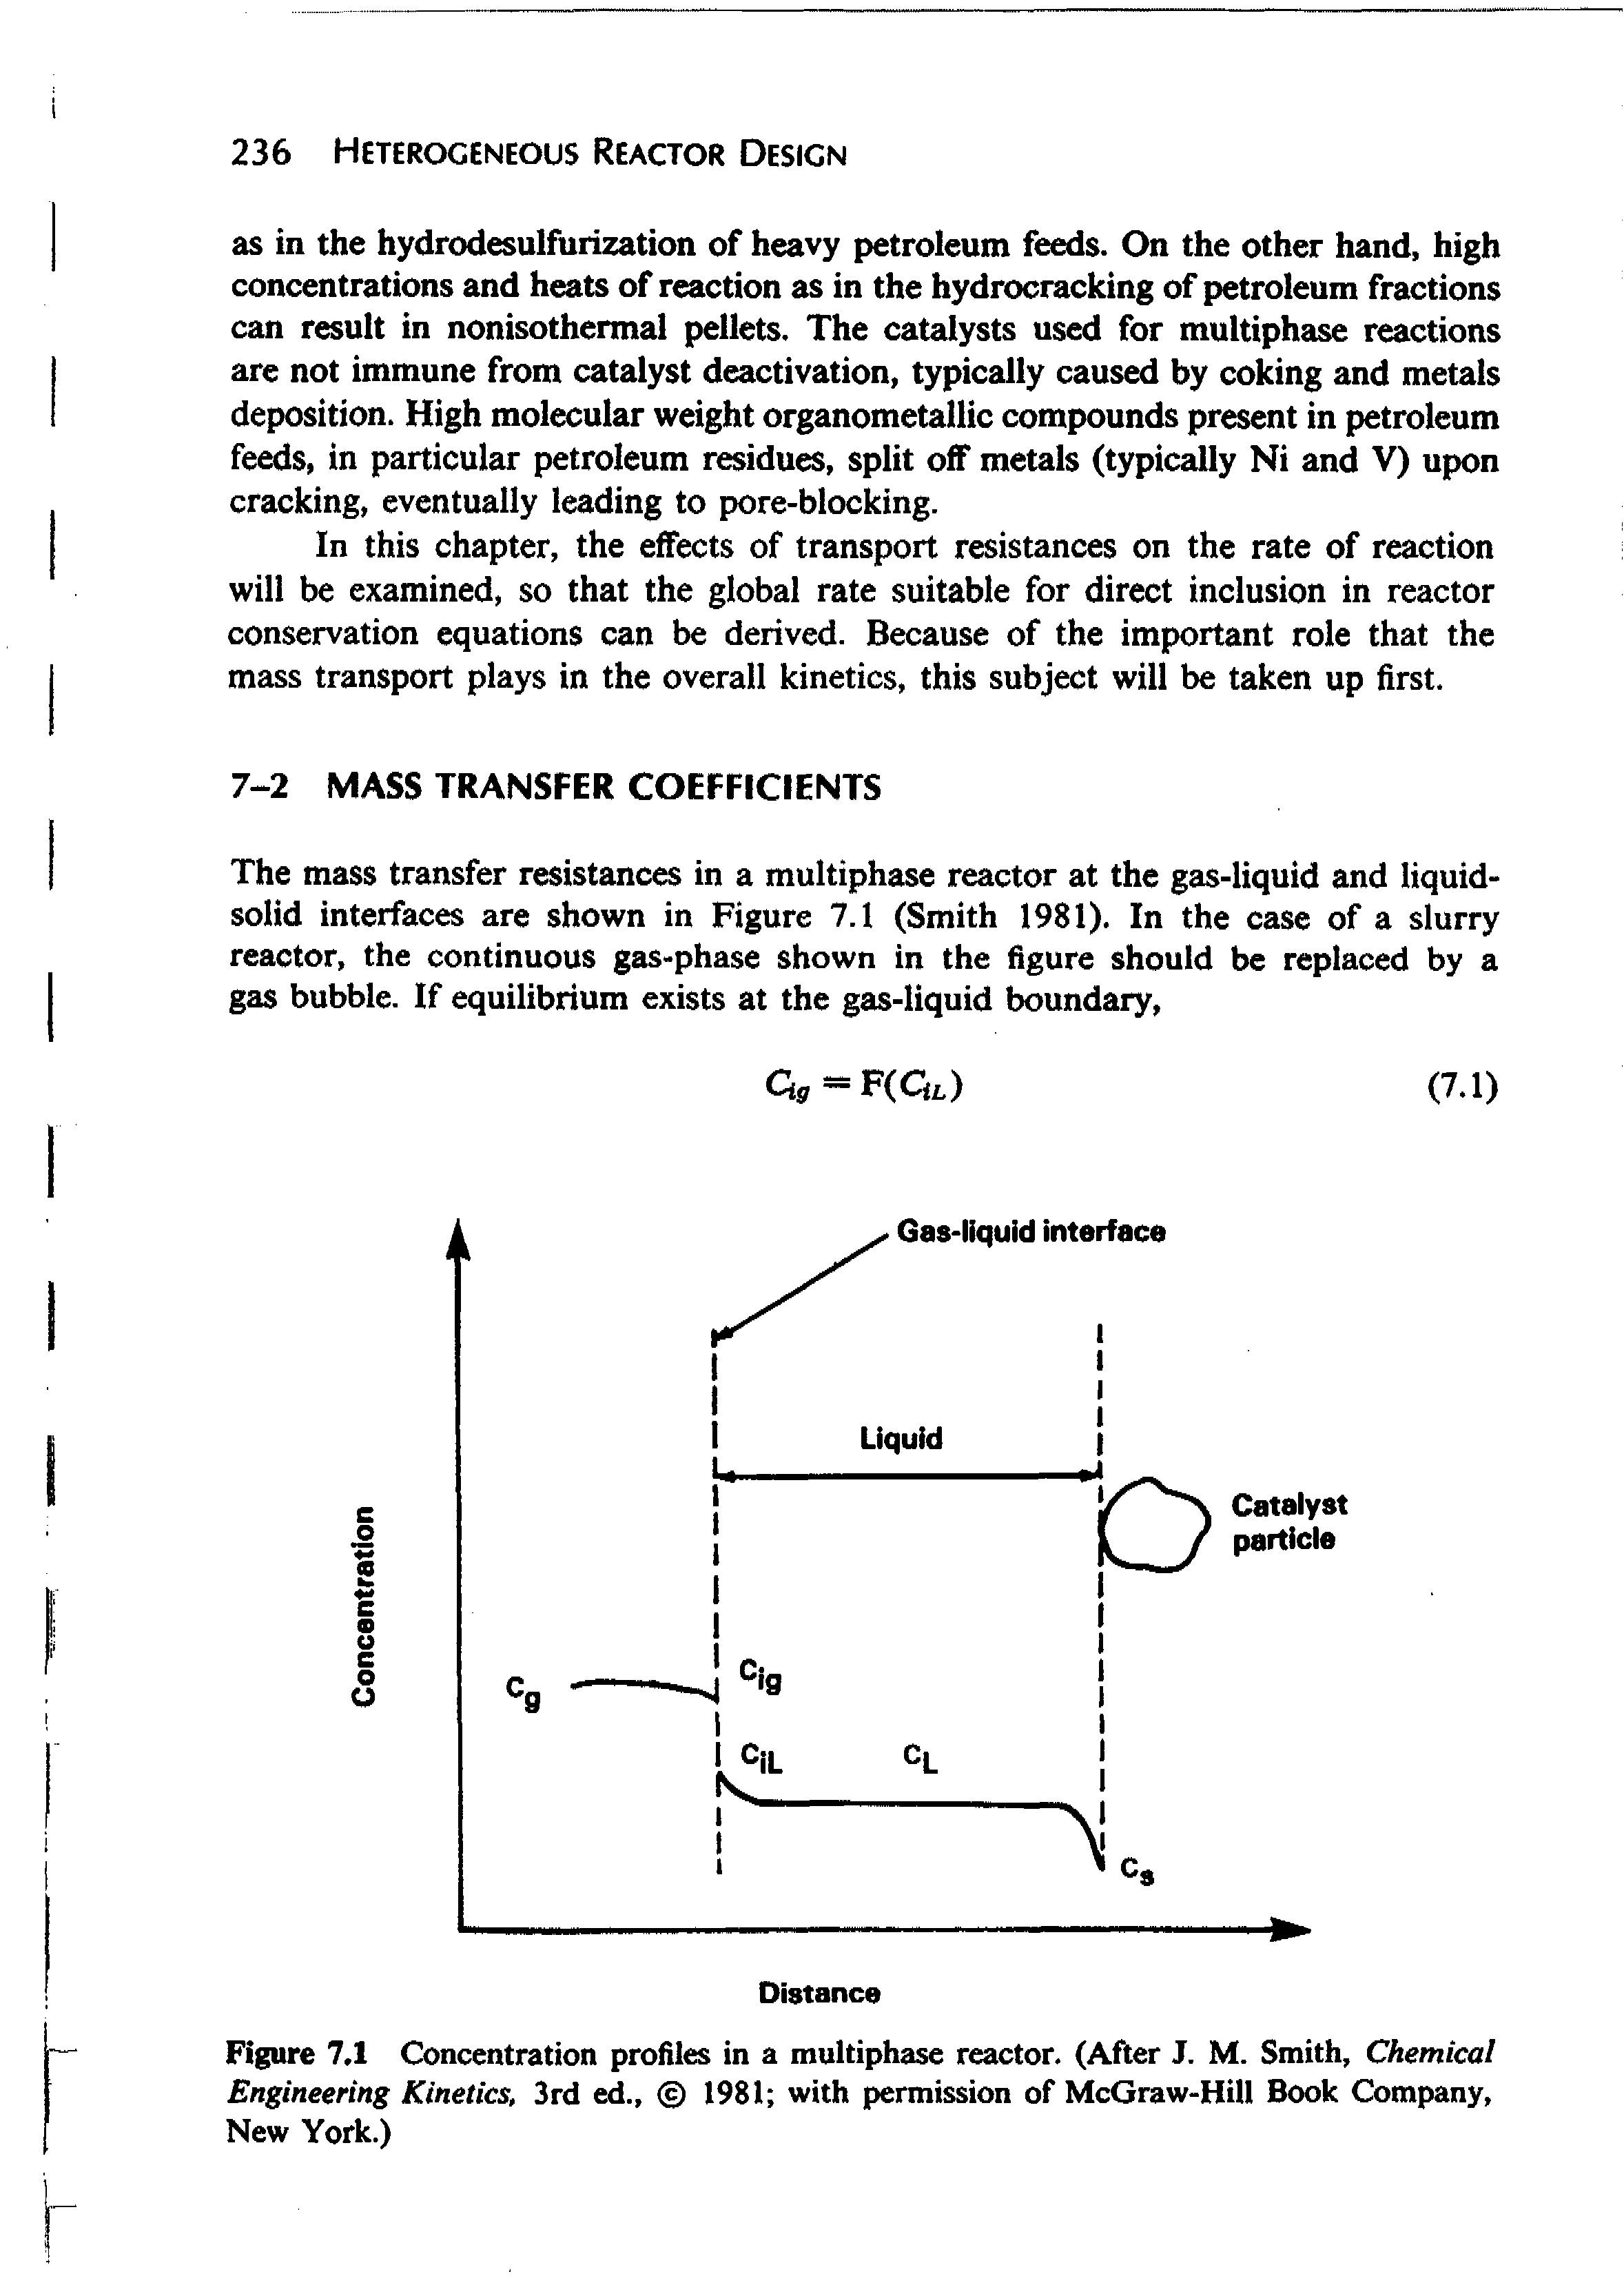 Figure 7,1 Concentration profiles in a multiphase reactor. (After J. M. Smith, Chemical Engineering Kinetics, 3rd ed., 1981 with permission of McGraw-Hill Book Company, New York.)...